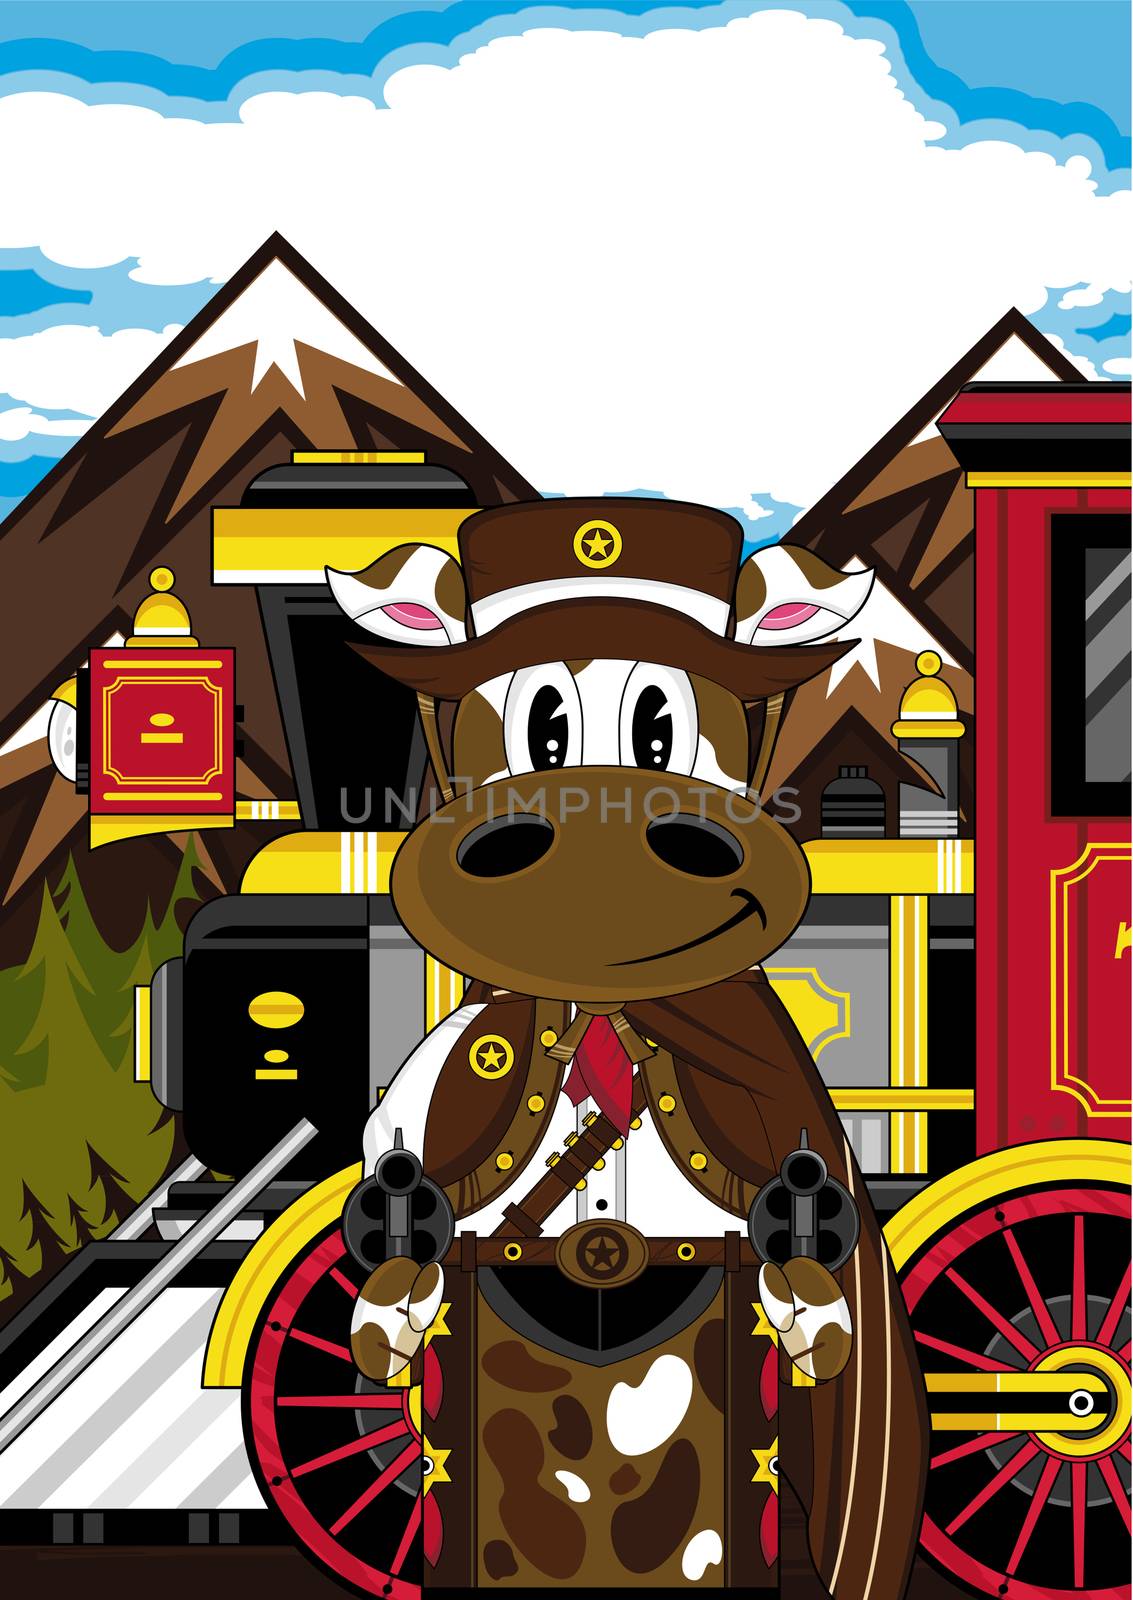 Adorably Cute Cartoon Wild West Cow Cowboy Sheriff and Vintage Steam Train Vector Illustration - by Mark Murphy Creative